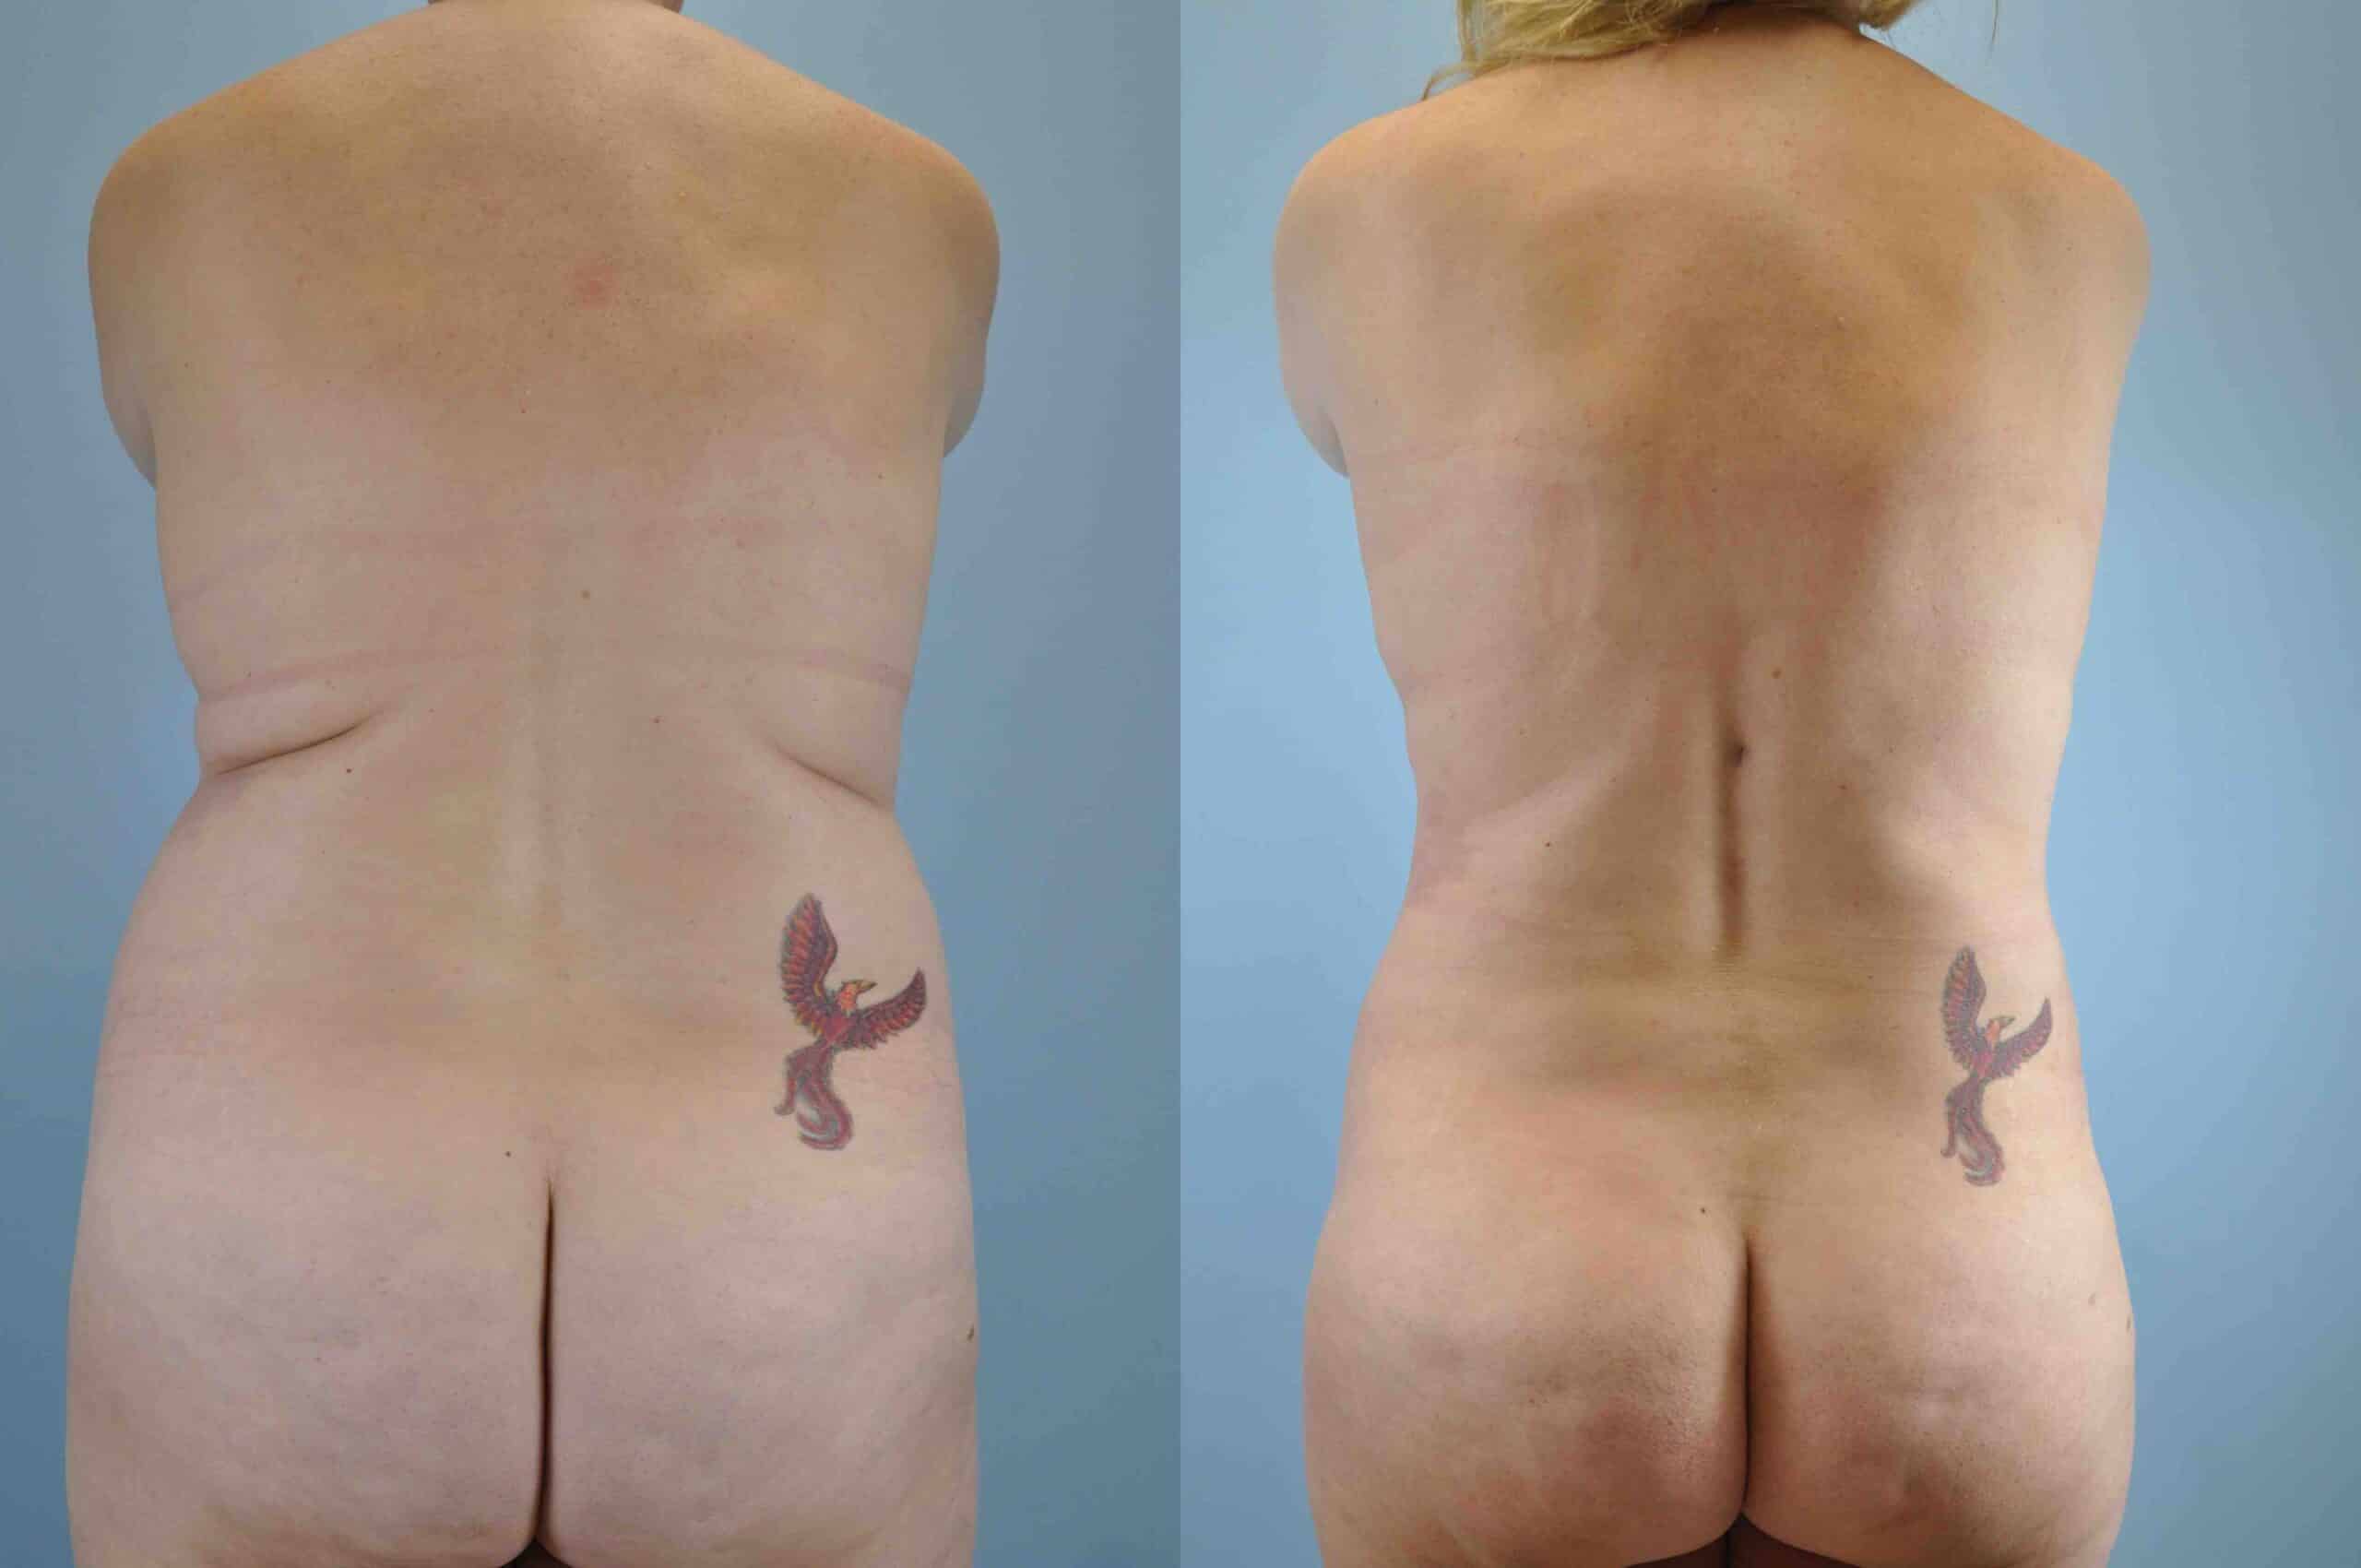 Before and after, 1 yr post op from Tummy Tuck, Breast Lift/Mastopexy, VASER Abdomen Flanks & Back performed by Dr. Paul Vanek (rear view)